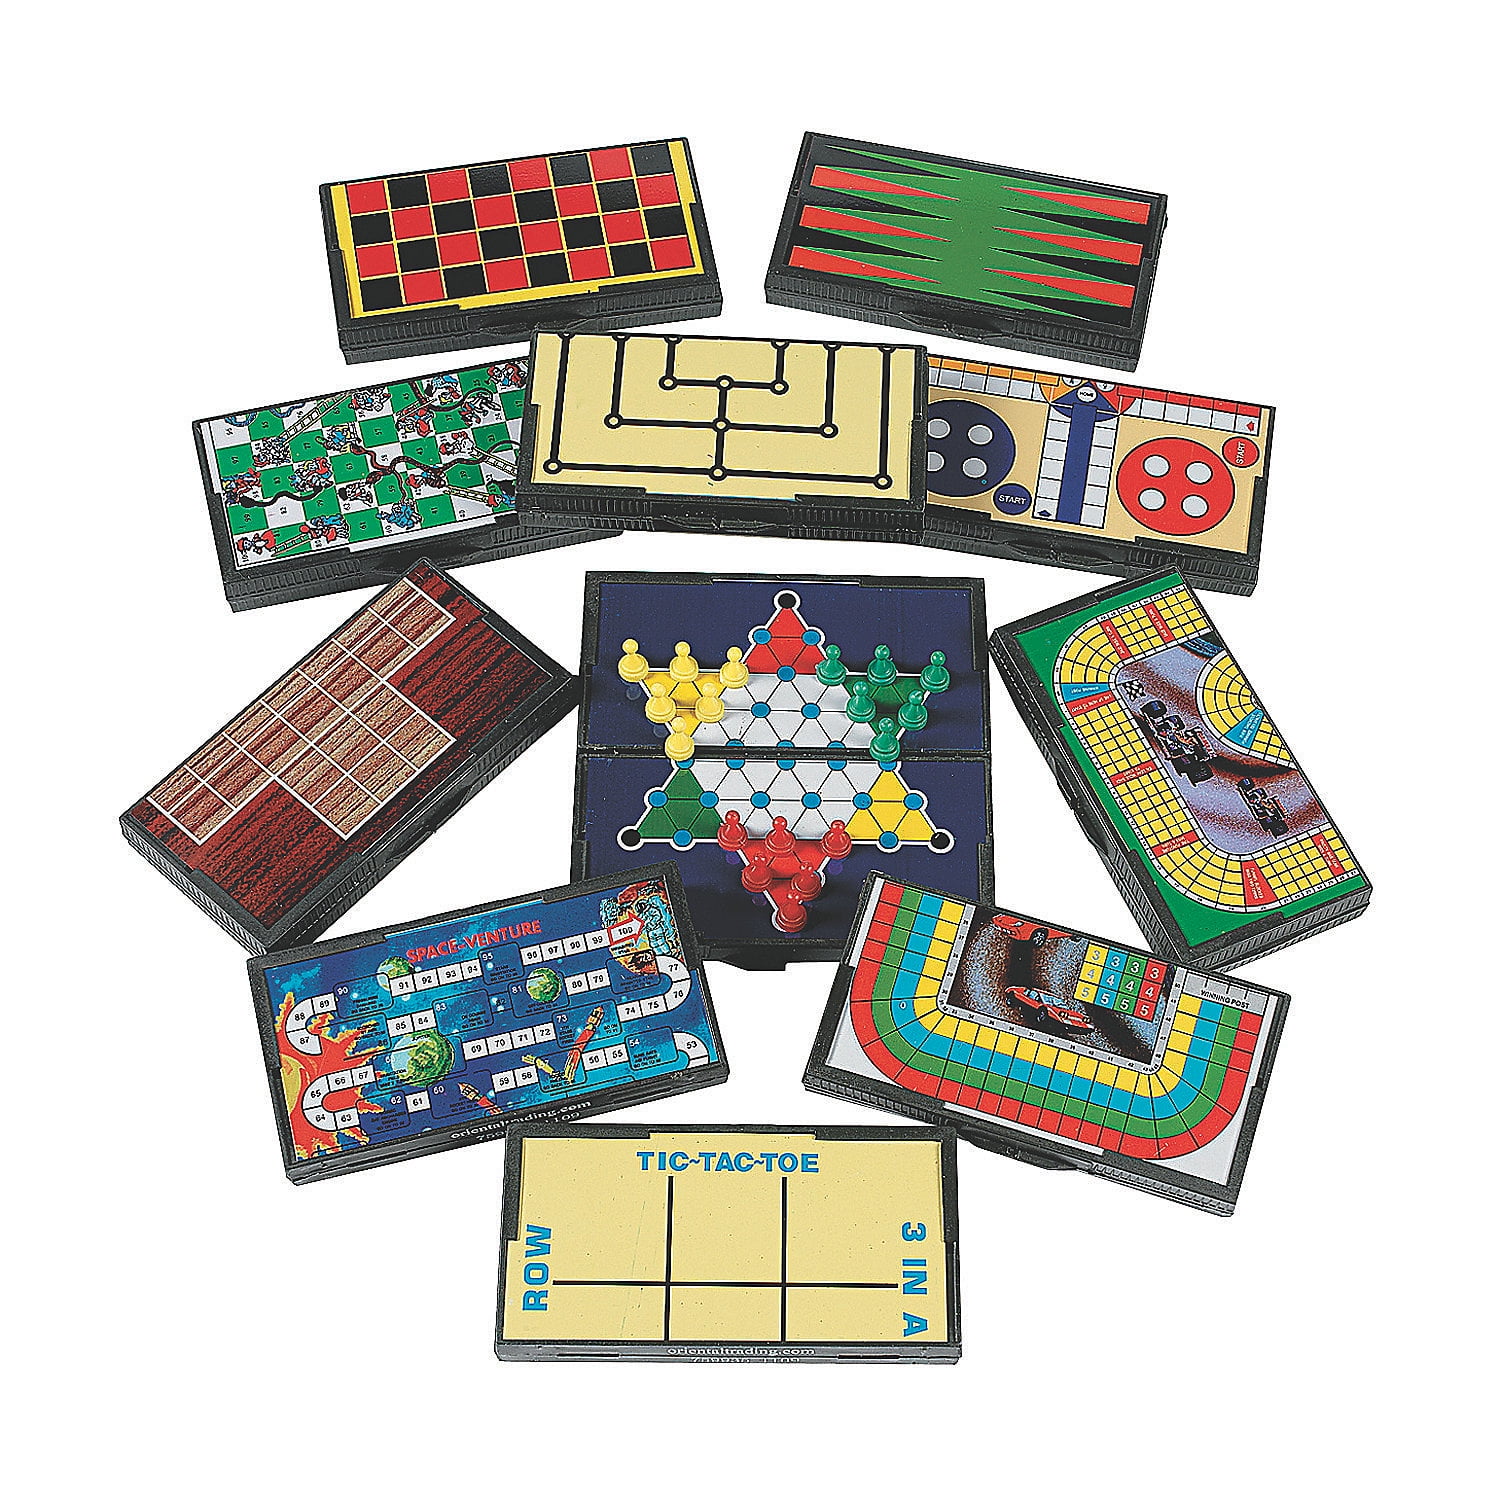 magnetic travel games adults